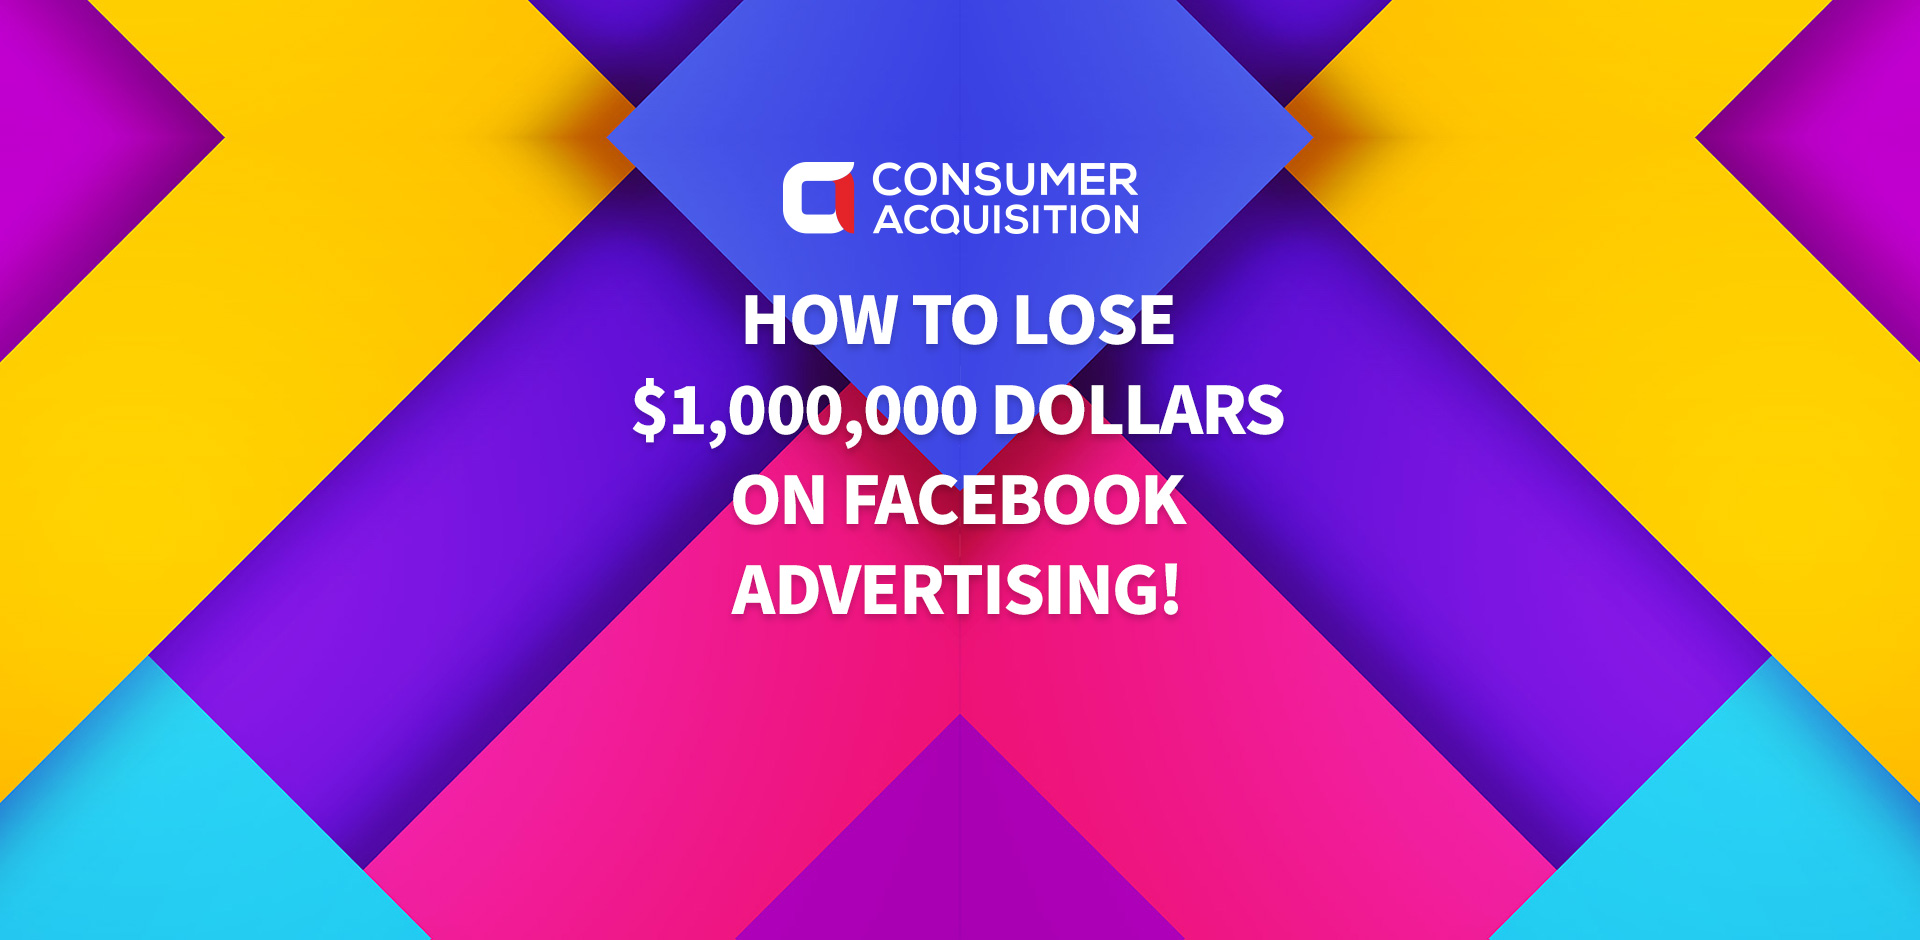 How Not to Lose $1,000,000 Dollars on Facebook Advertising!